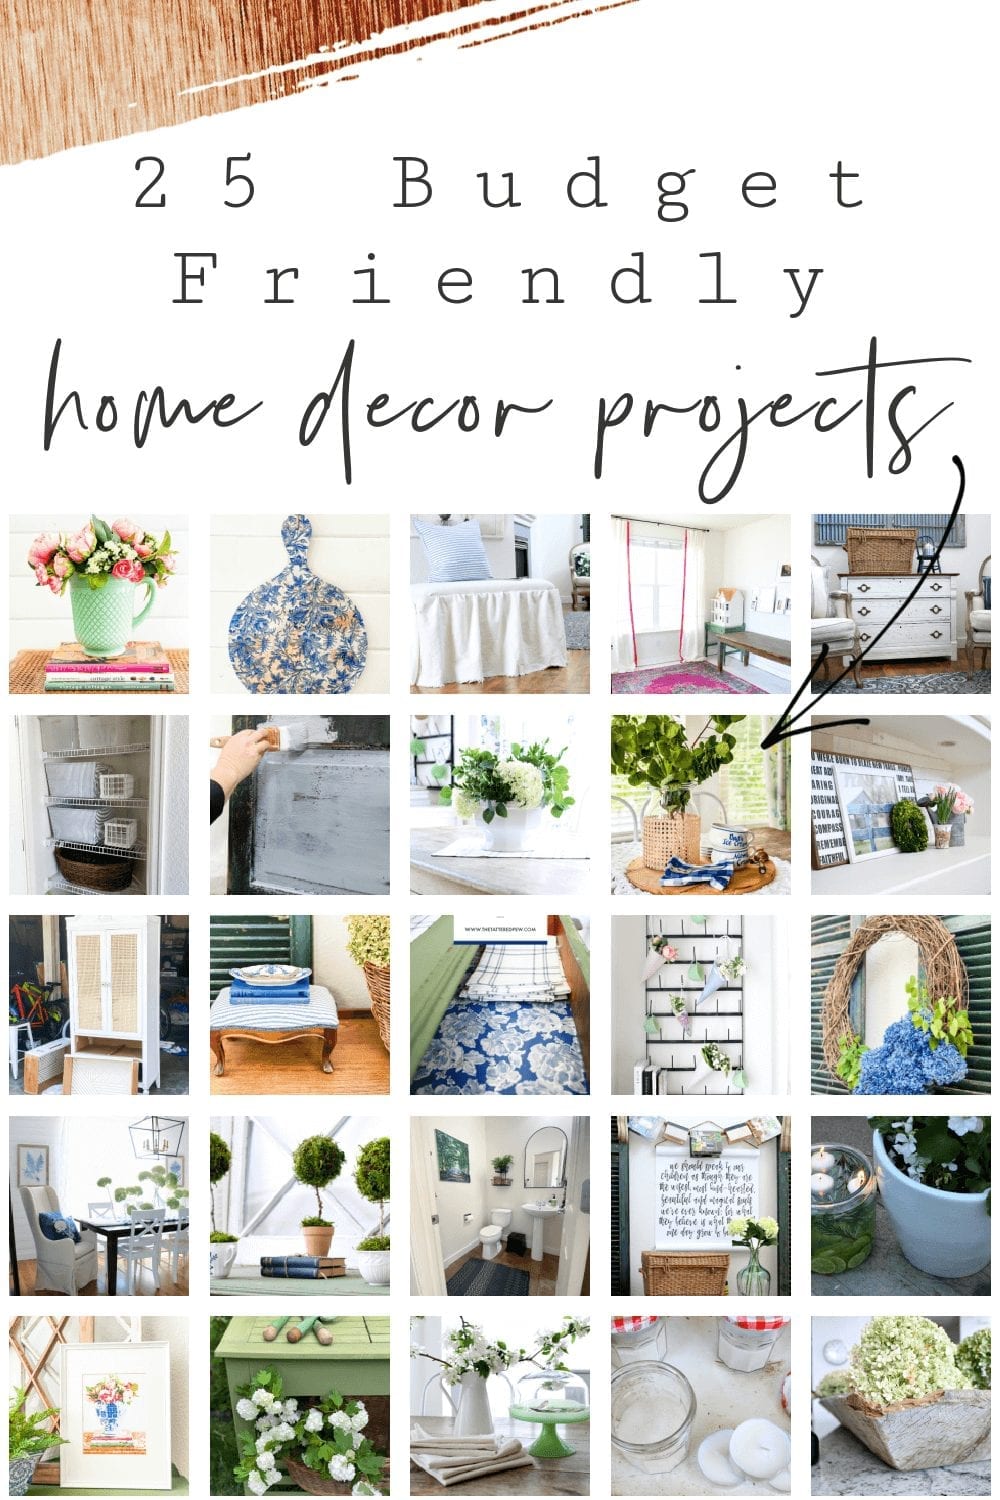 25 Budget Friendly Home Decor Projects » The Tattered Pew